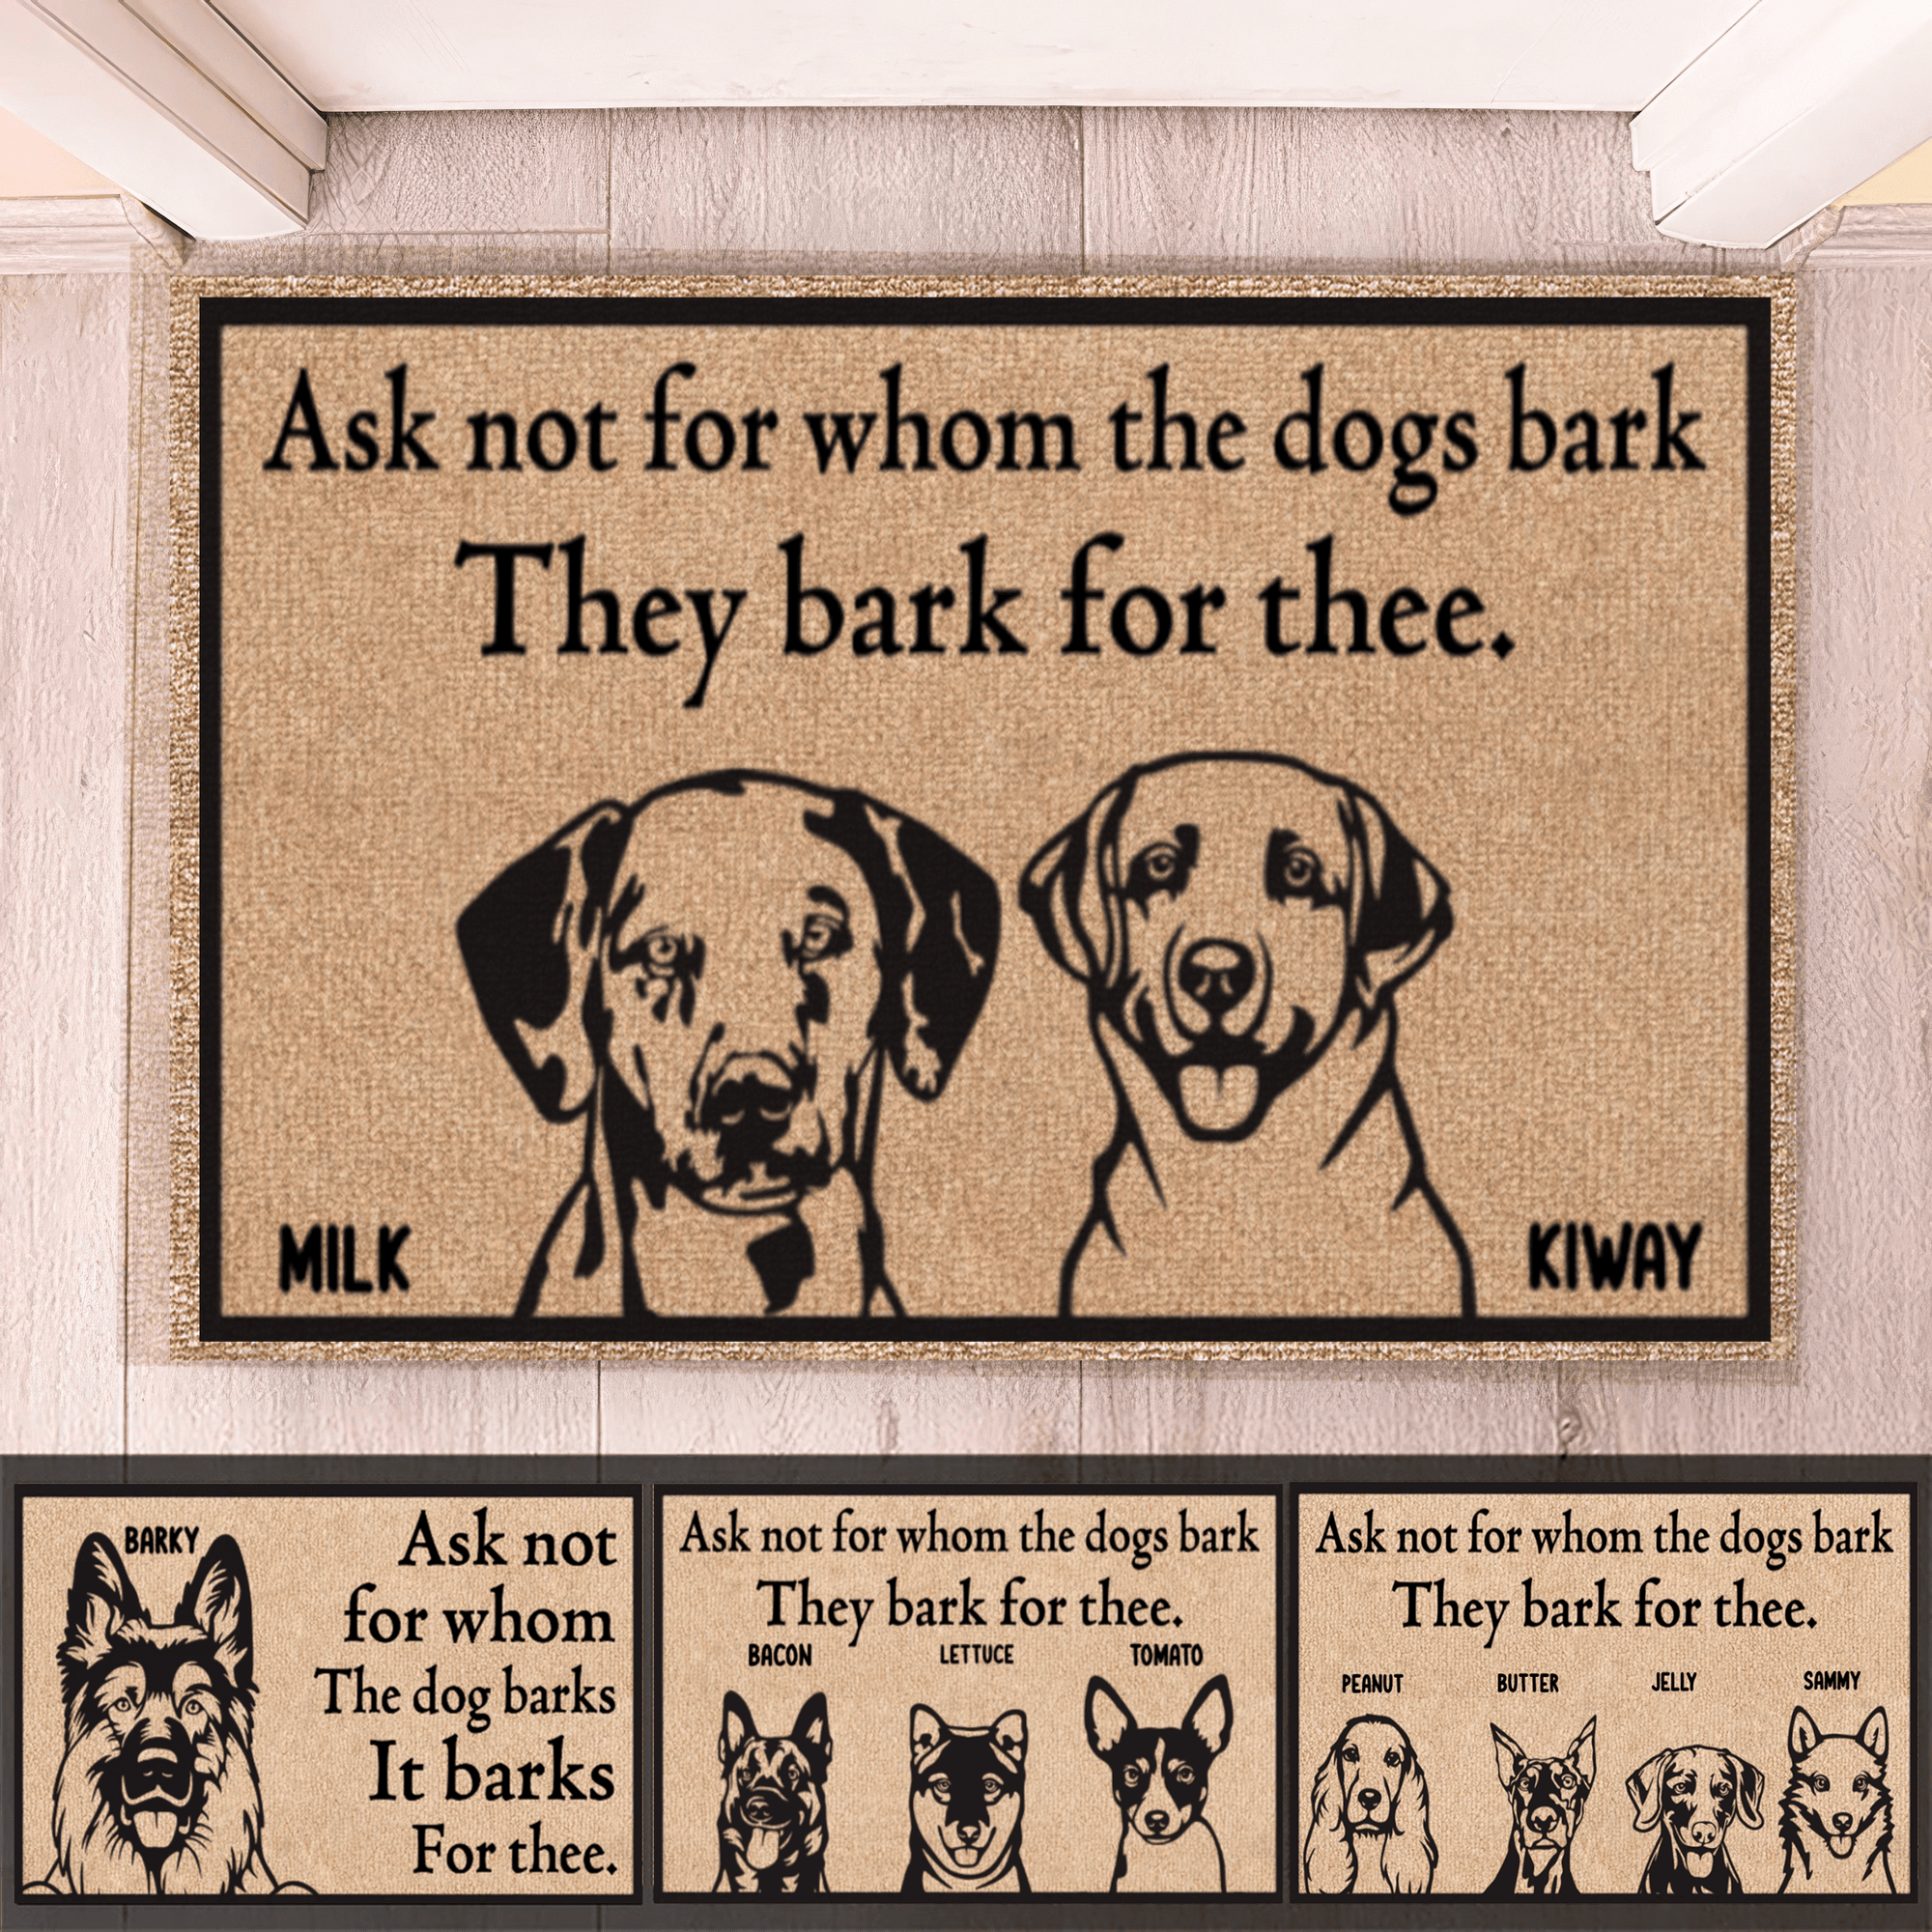 Ask Not Whom The Dog Barks For. It Barks For Thee - Personalized Doormat - Birthday, Housewarming, Funny Gift for Homeowners, Friends, Dog Mom, Dog Dad, Dog Lovers, Pet Gifts for Him, Her - Suzitee Store